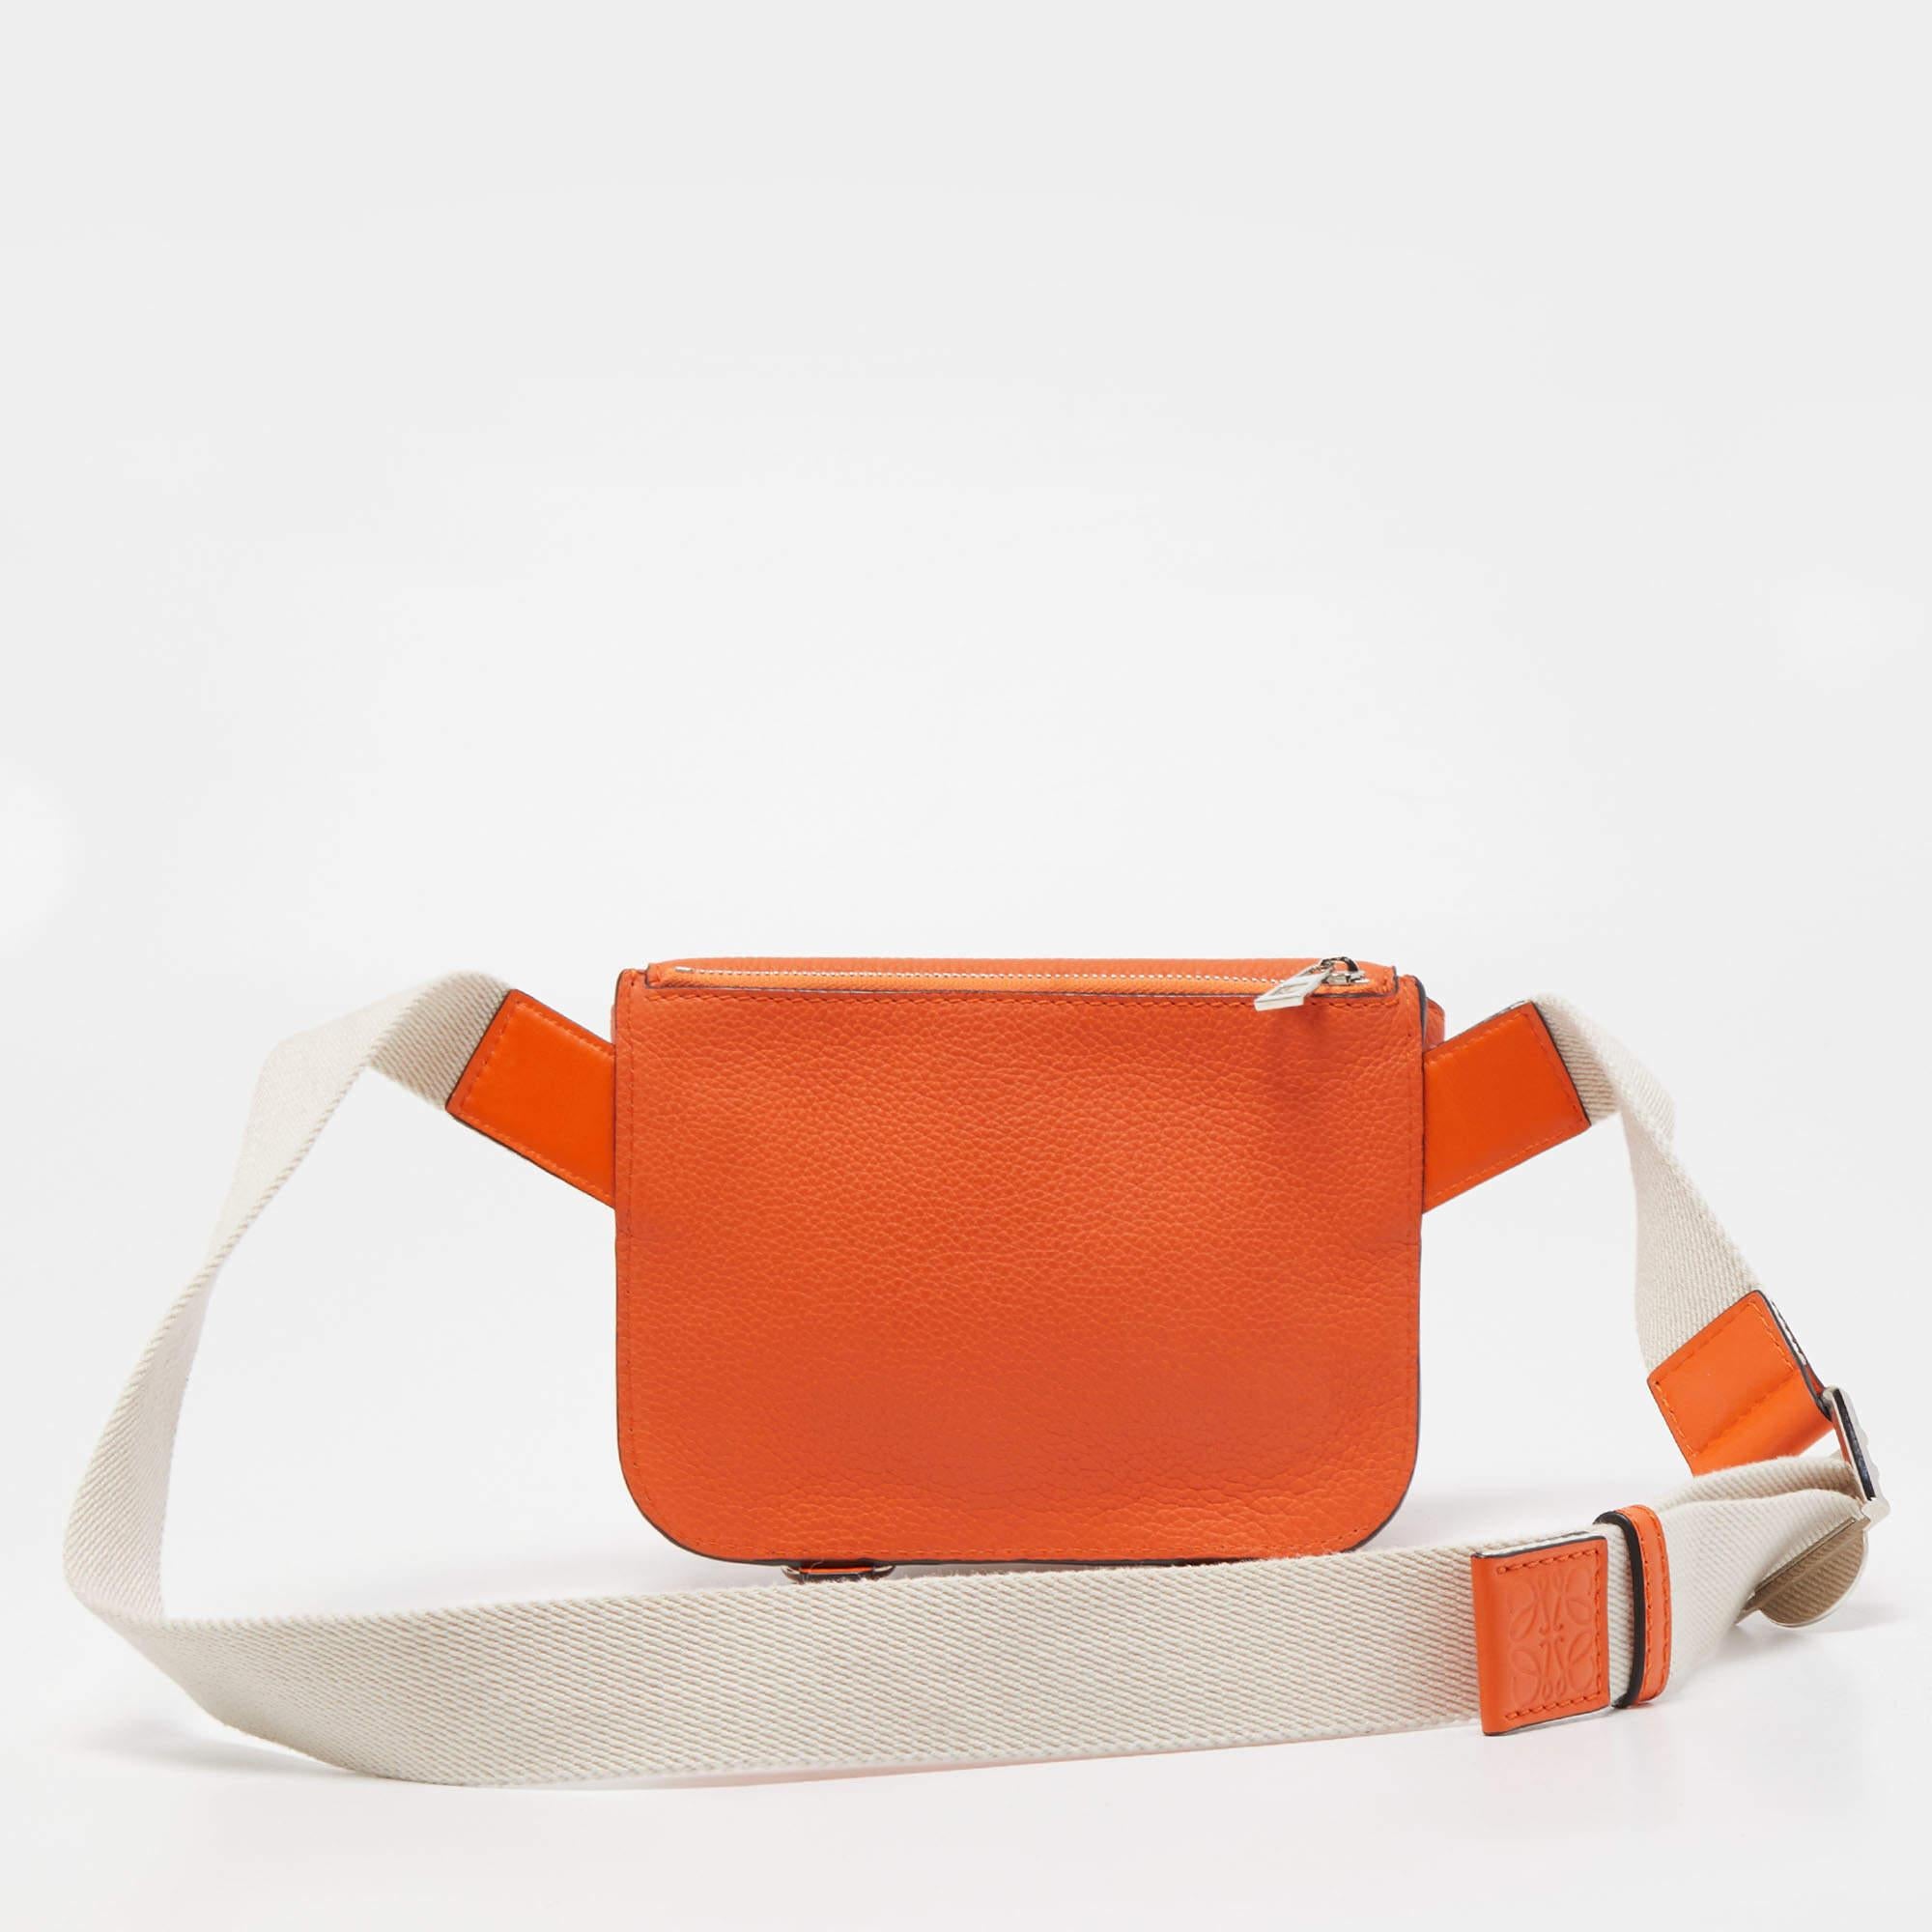 Belt bags are edgy, stylish and will never disappoint you when it comes to completing an outfit! This Loewe one is crafted wonderfully with a chic exterior, a compact, well-lined interor, and an adjustable belt that sits perfectly on your waist. Get